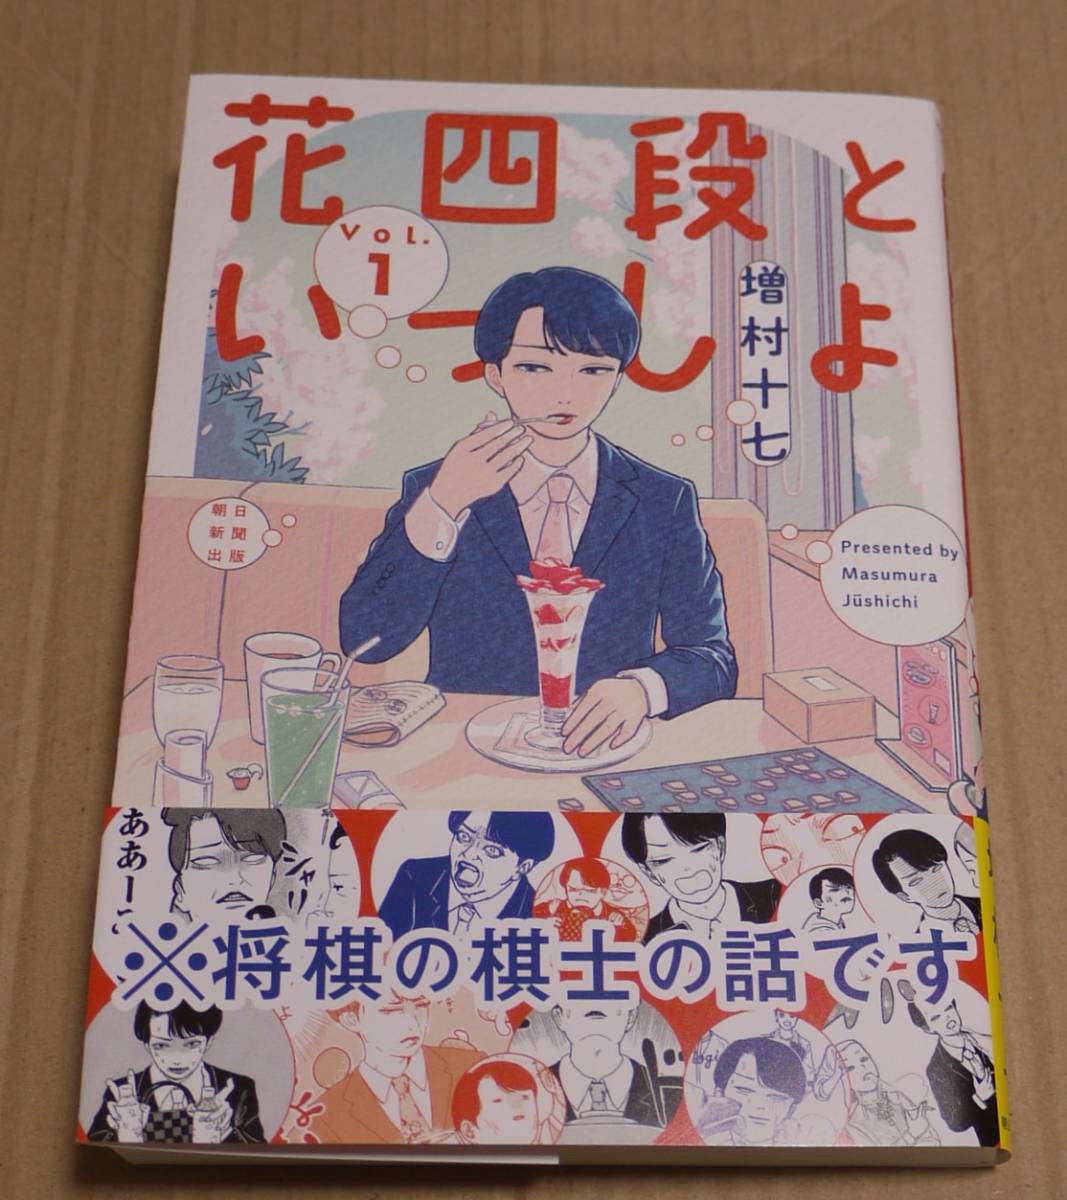 1 volume of Hana Yodan to Issho (Jushichi Masumura) with hand-drawn illustrations and autographs. Includes postcard. Click Post shipping (185 yen) included., comics, anime goods, sign, Hand-drawn painting